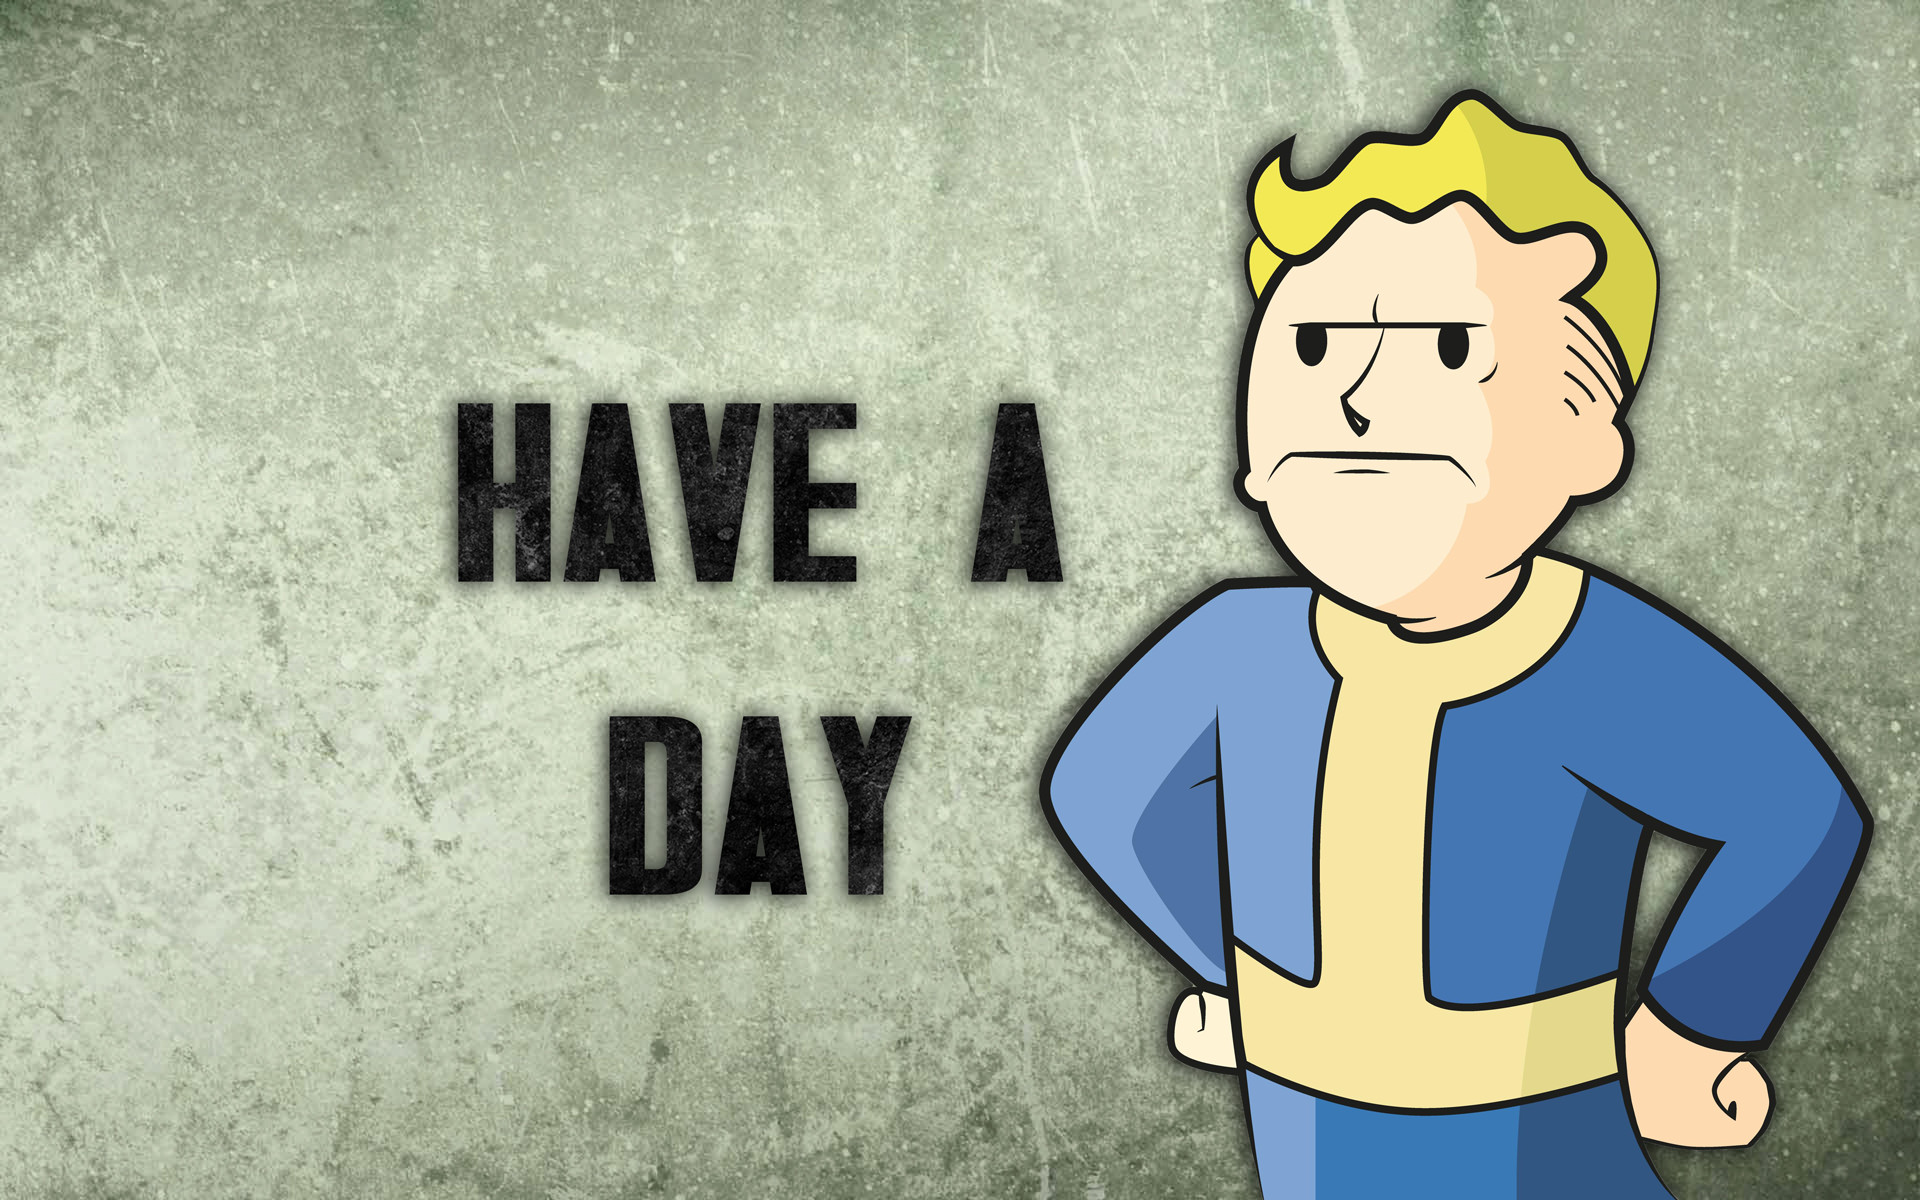 1920x1200 In light of having to wait for Fallout 4 and not owning an IOS device to  play Fallout Shelter, this is how I pass my time. Making themed wallpapers.